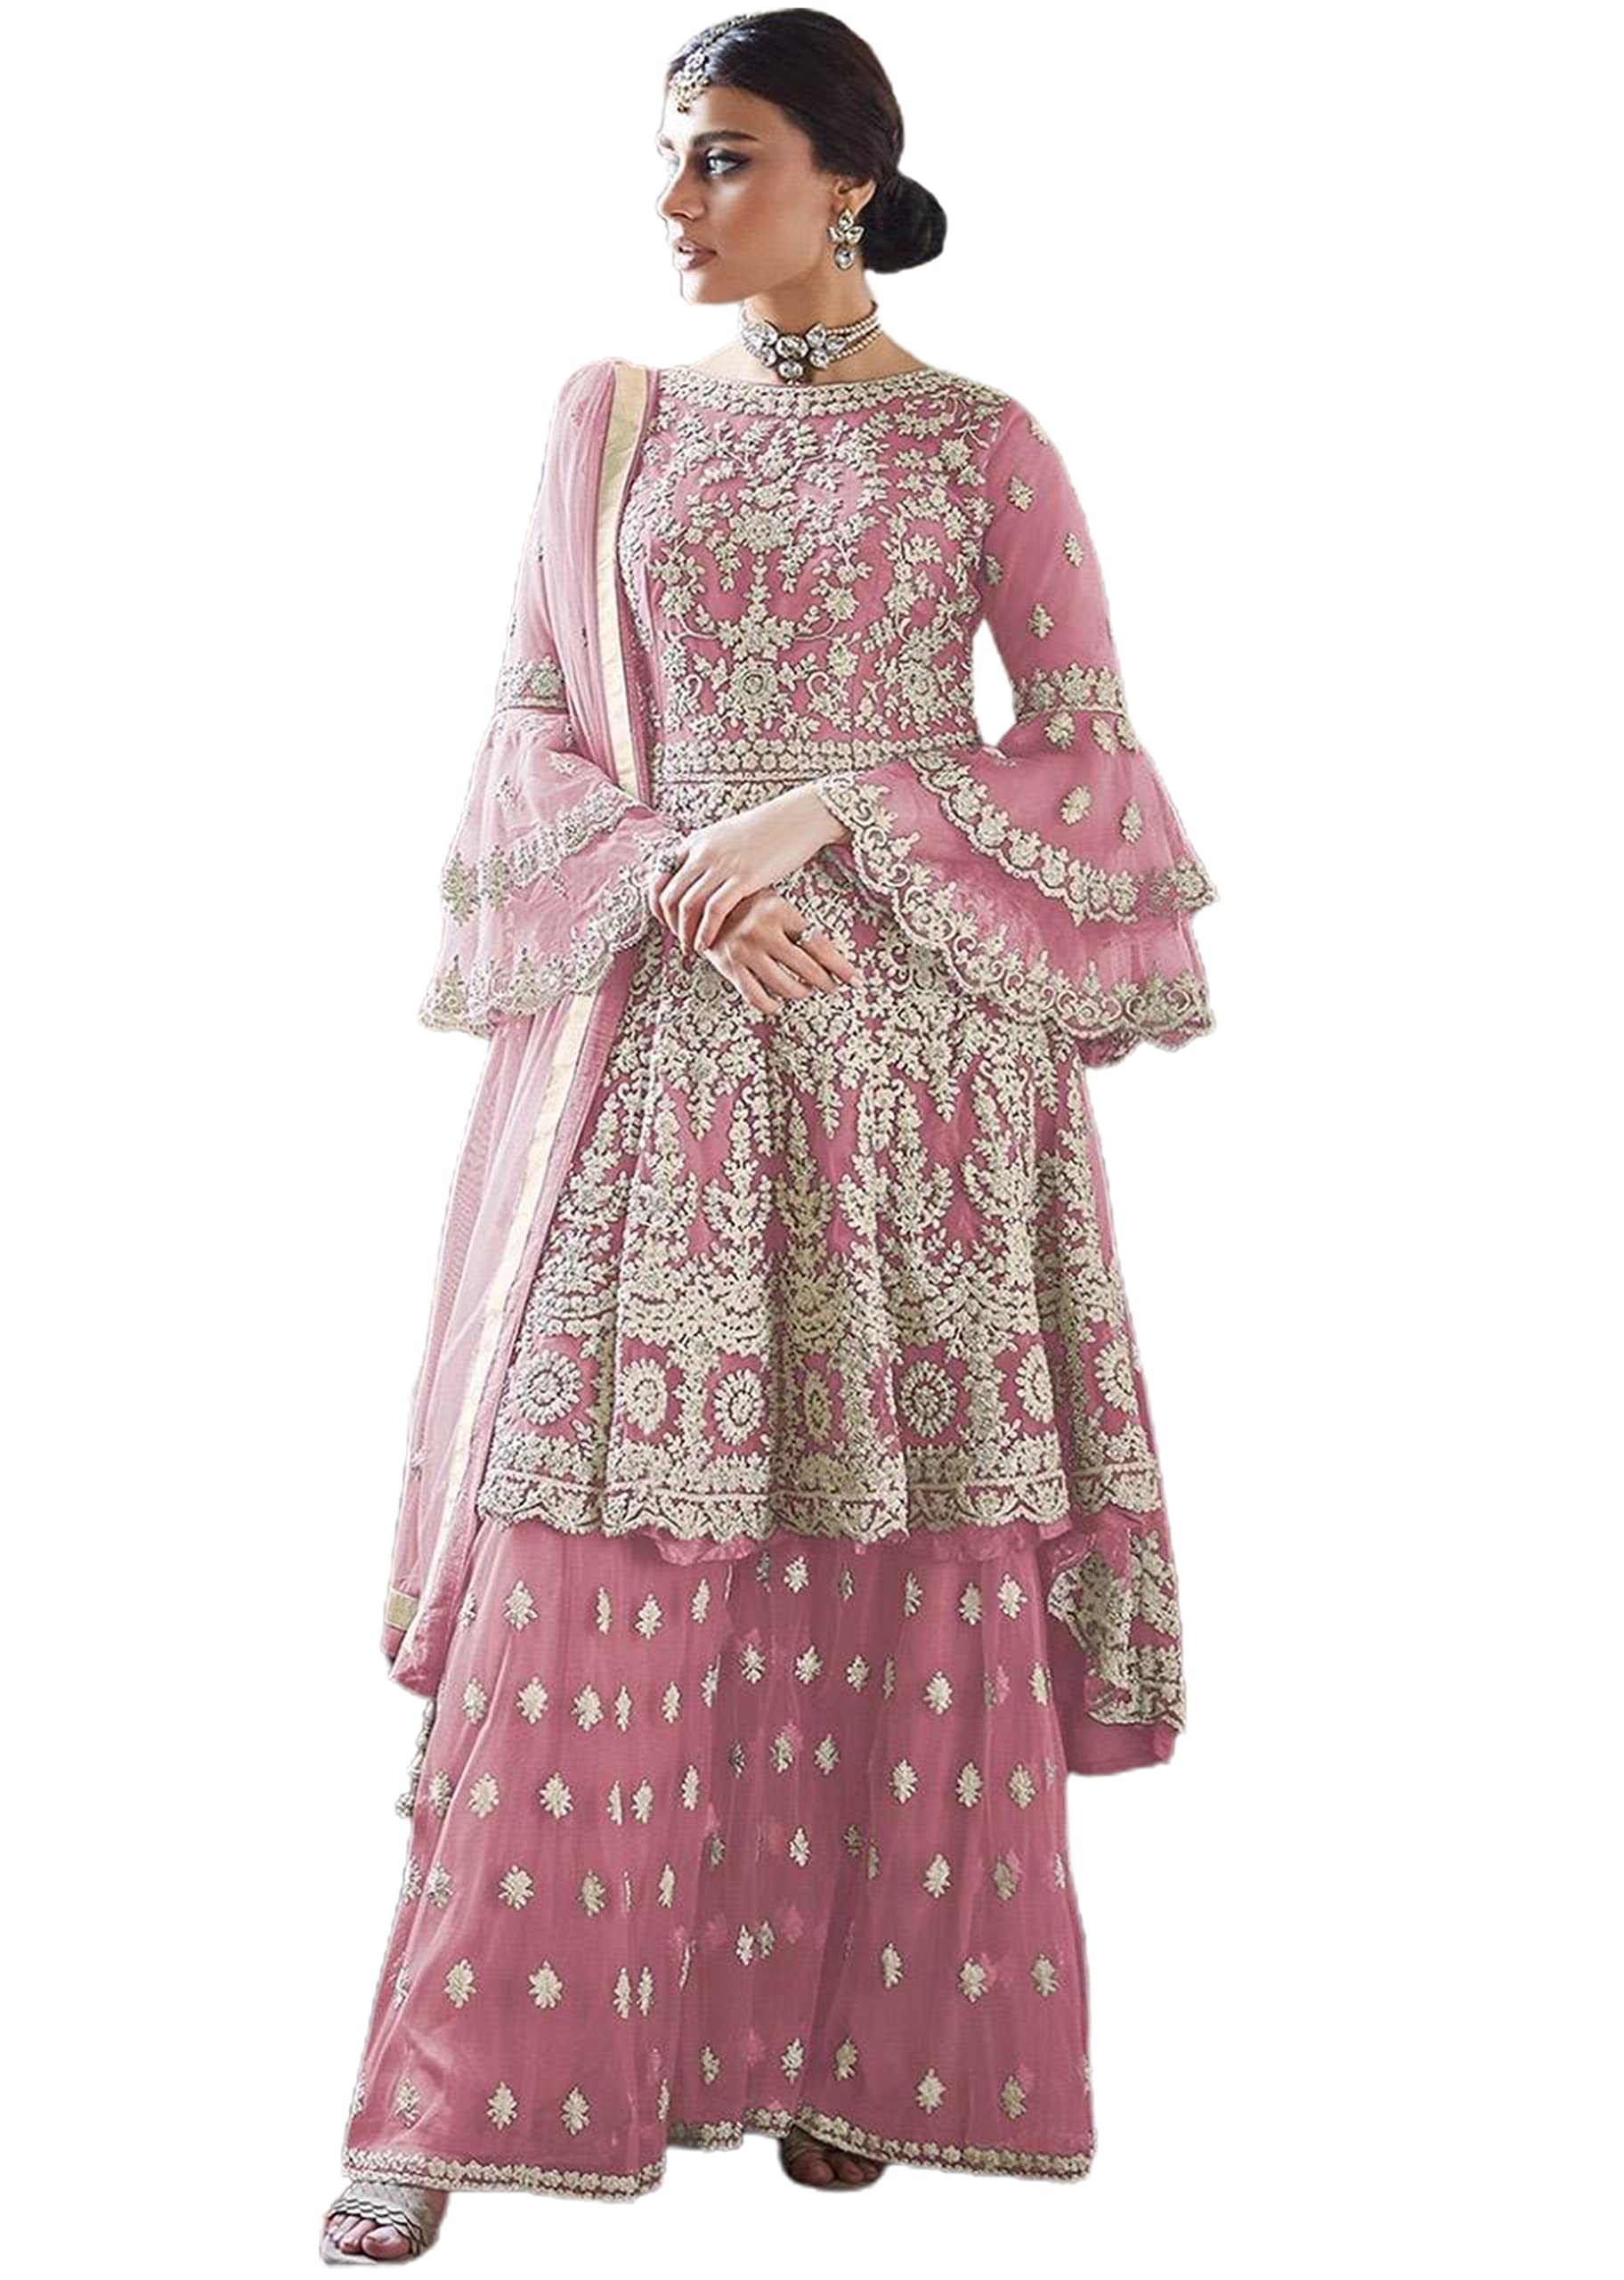 Miss Ethnik Women's Net Semi Stitched Top With Bottom and Dupatta Embroidered Flared Top (Kurta Palazzo Set) -  Salwar Suits in Sri Lanka from Arcade Online Shopping - Just Rs. 7400!